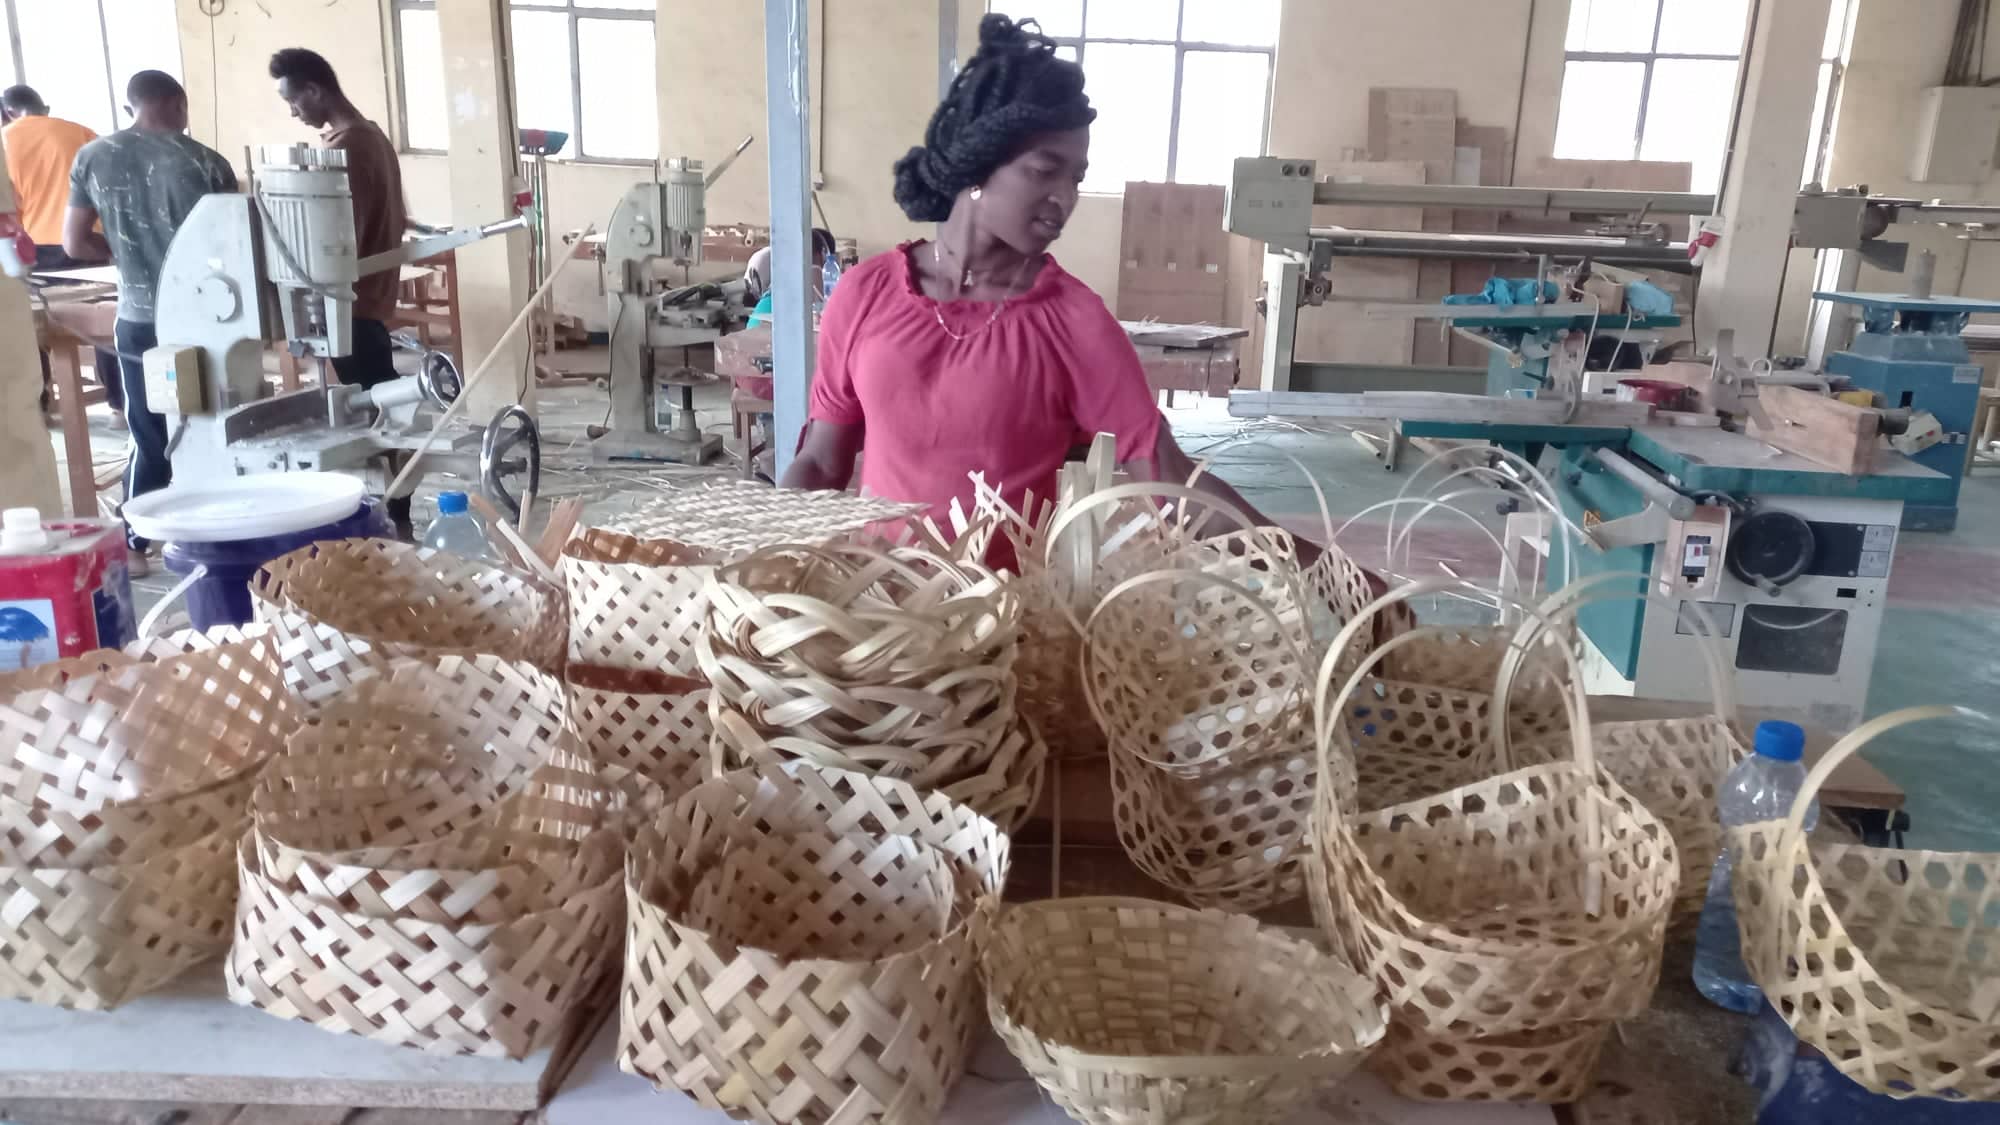 Final products after bamboo processing training. 